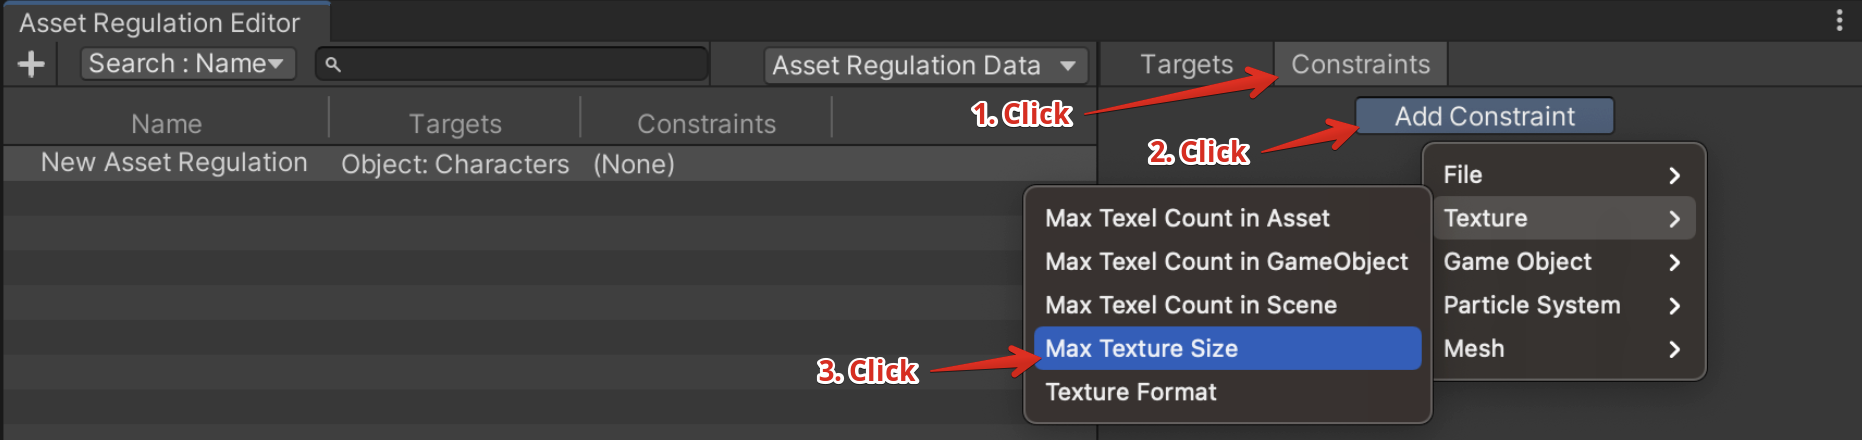 Max Texture Size